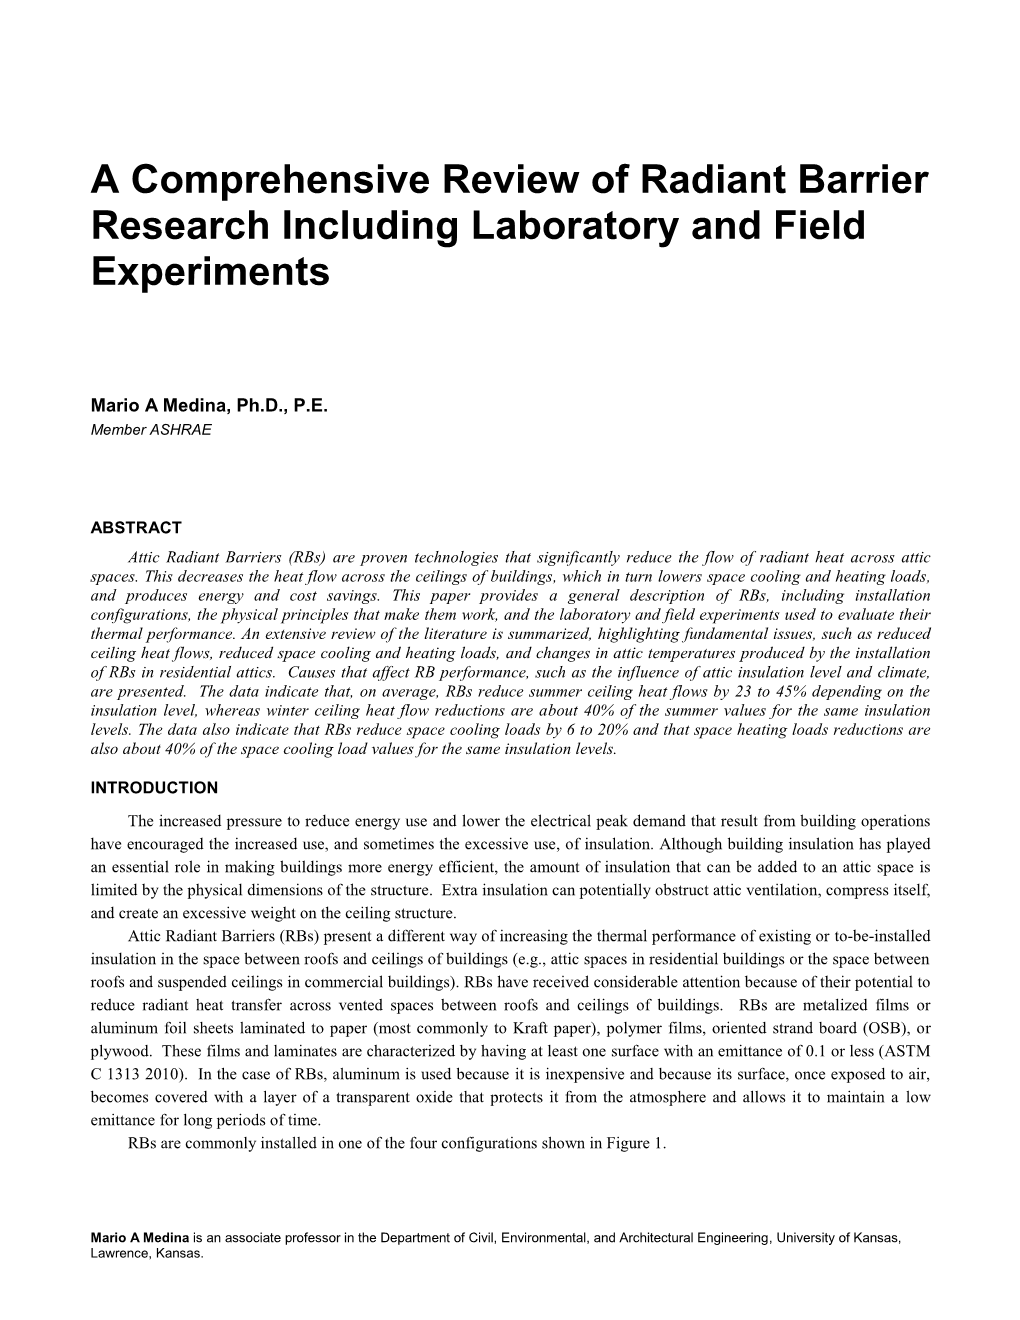 A Comprehensive Review of Radiant Barrier Research Including Laboratory and Field Experiments